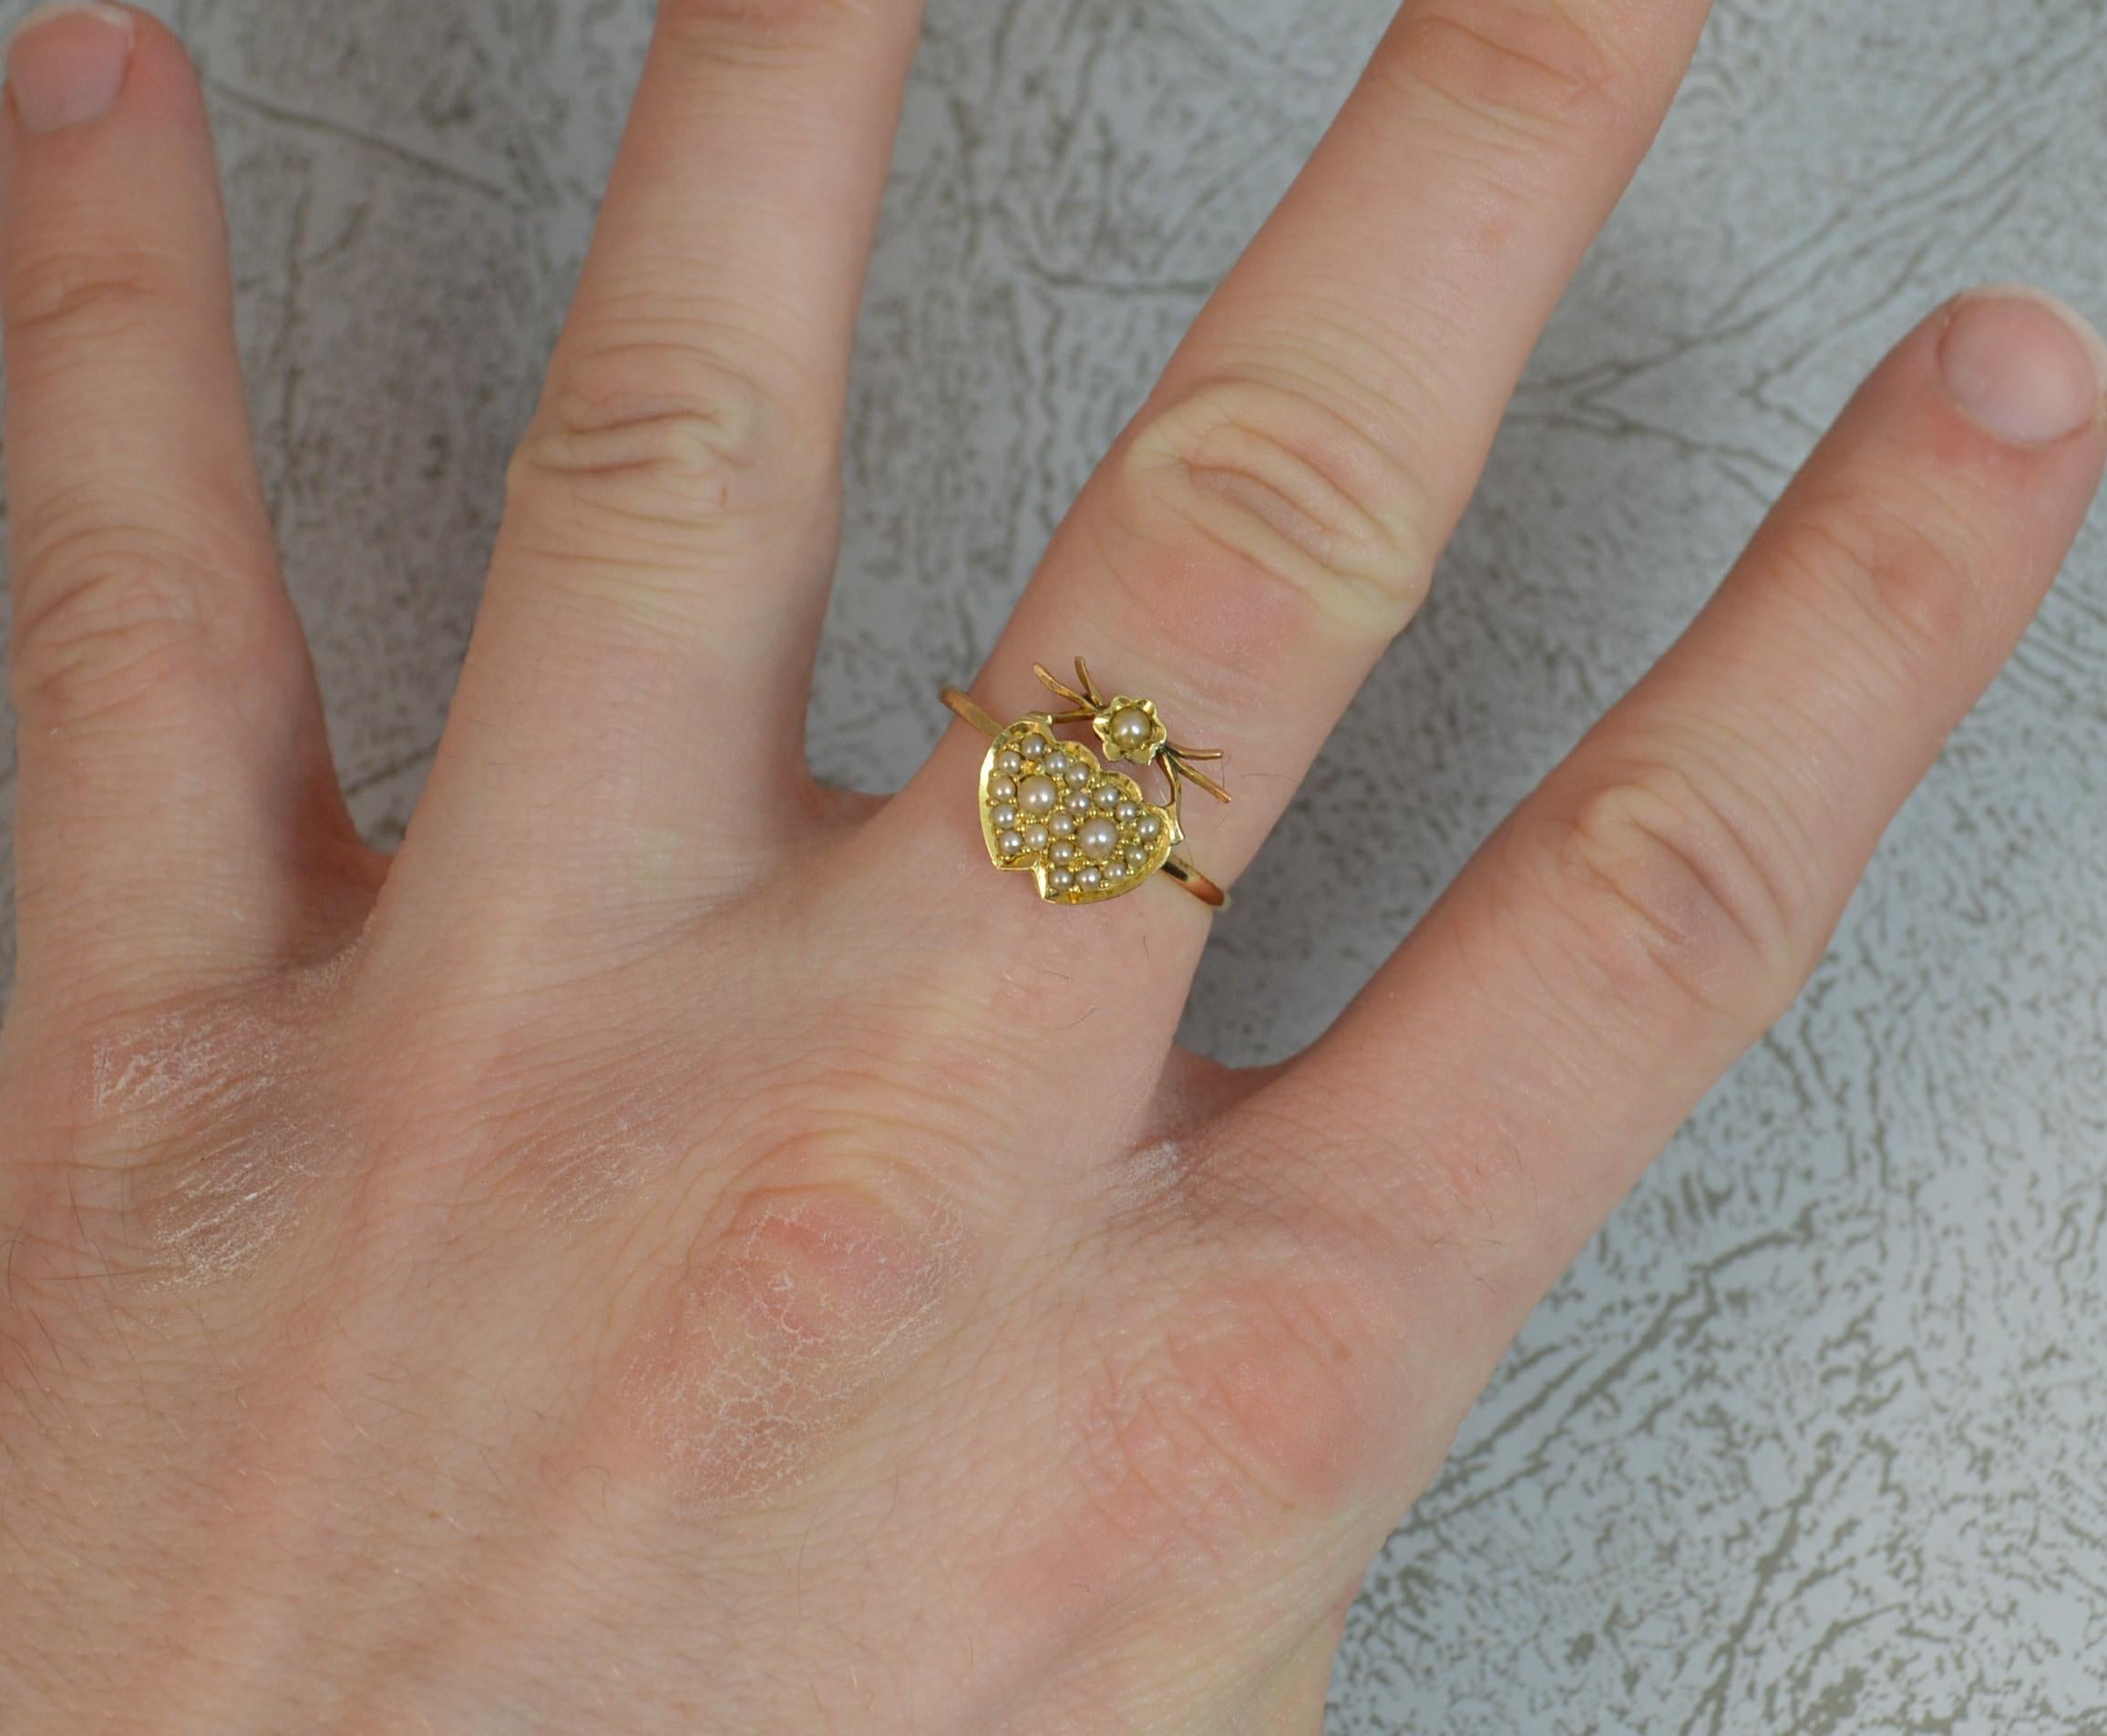 A beautiful Victorian era double cluster ring.
SIZE ; P UK, 7 3/4 US
Solid yellow gold example. 
Designed with two hearts entwined and encrusted with seed pearls. 
11mm x 12mm head. Simple shank.
CONDITION ; Very good for age. Clean and solid band.